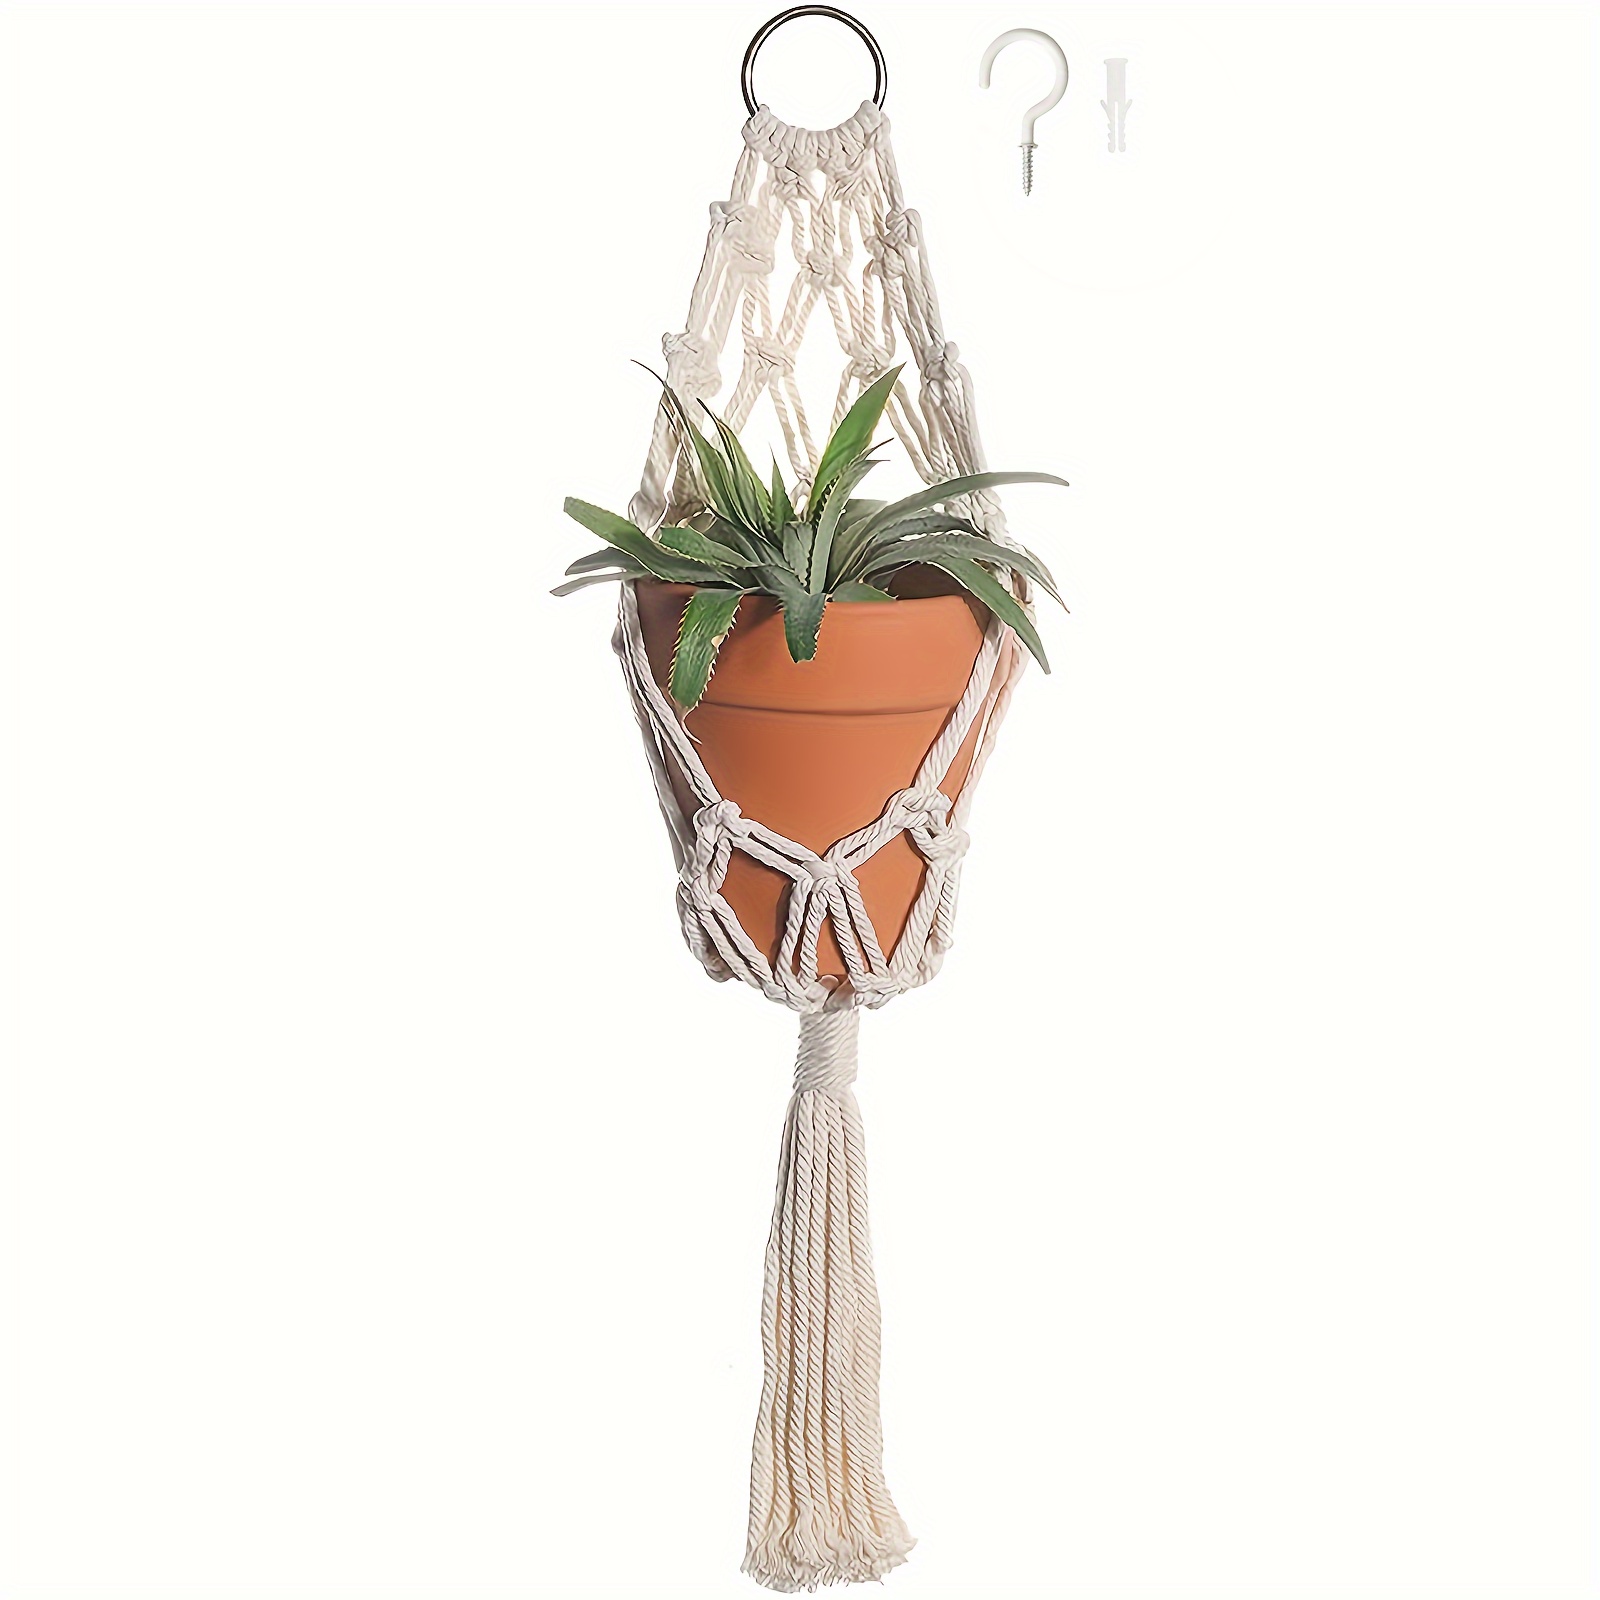 

1 Pack, Boho Macrame Plant Hangers Handmade Hemp Rope Hanging Baskets For Indoor Plants With Ceiling Hooks, Bohemian Home Decor Outdoor Wall Art